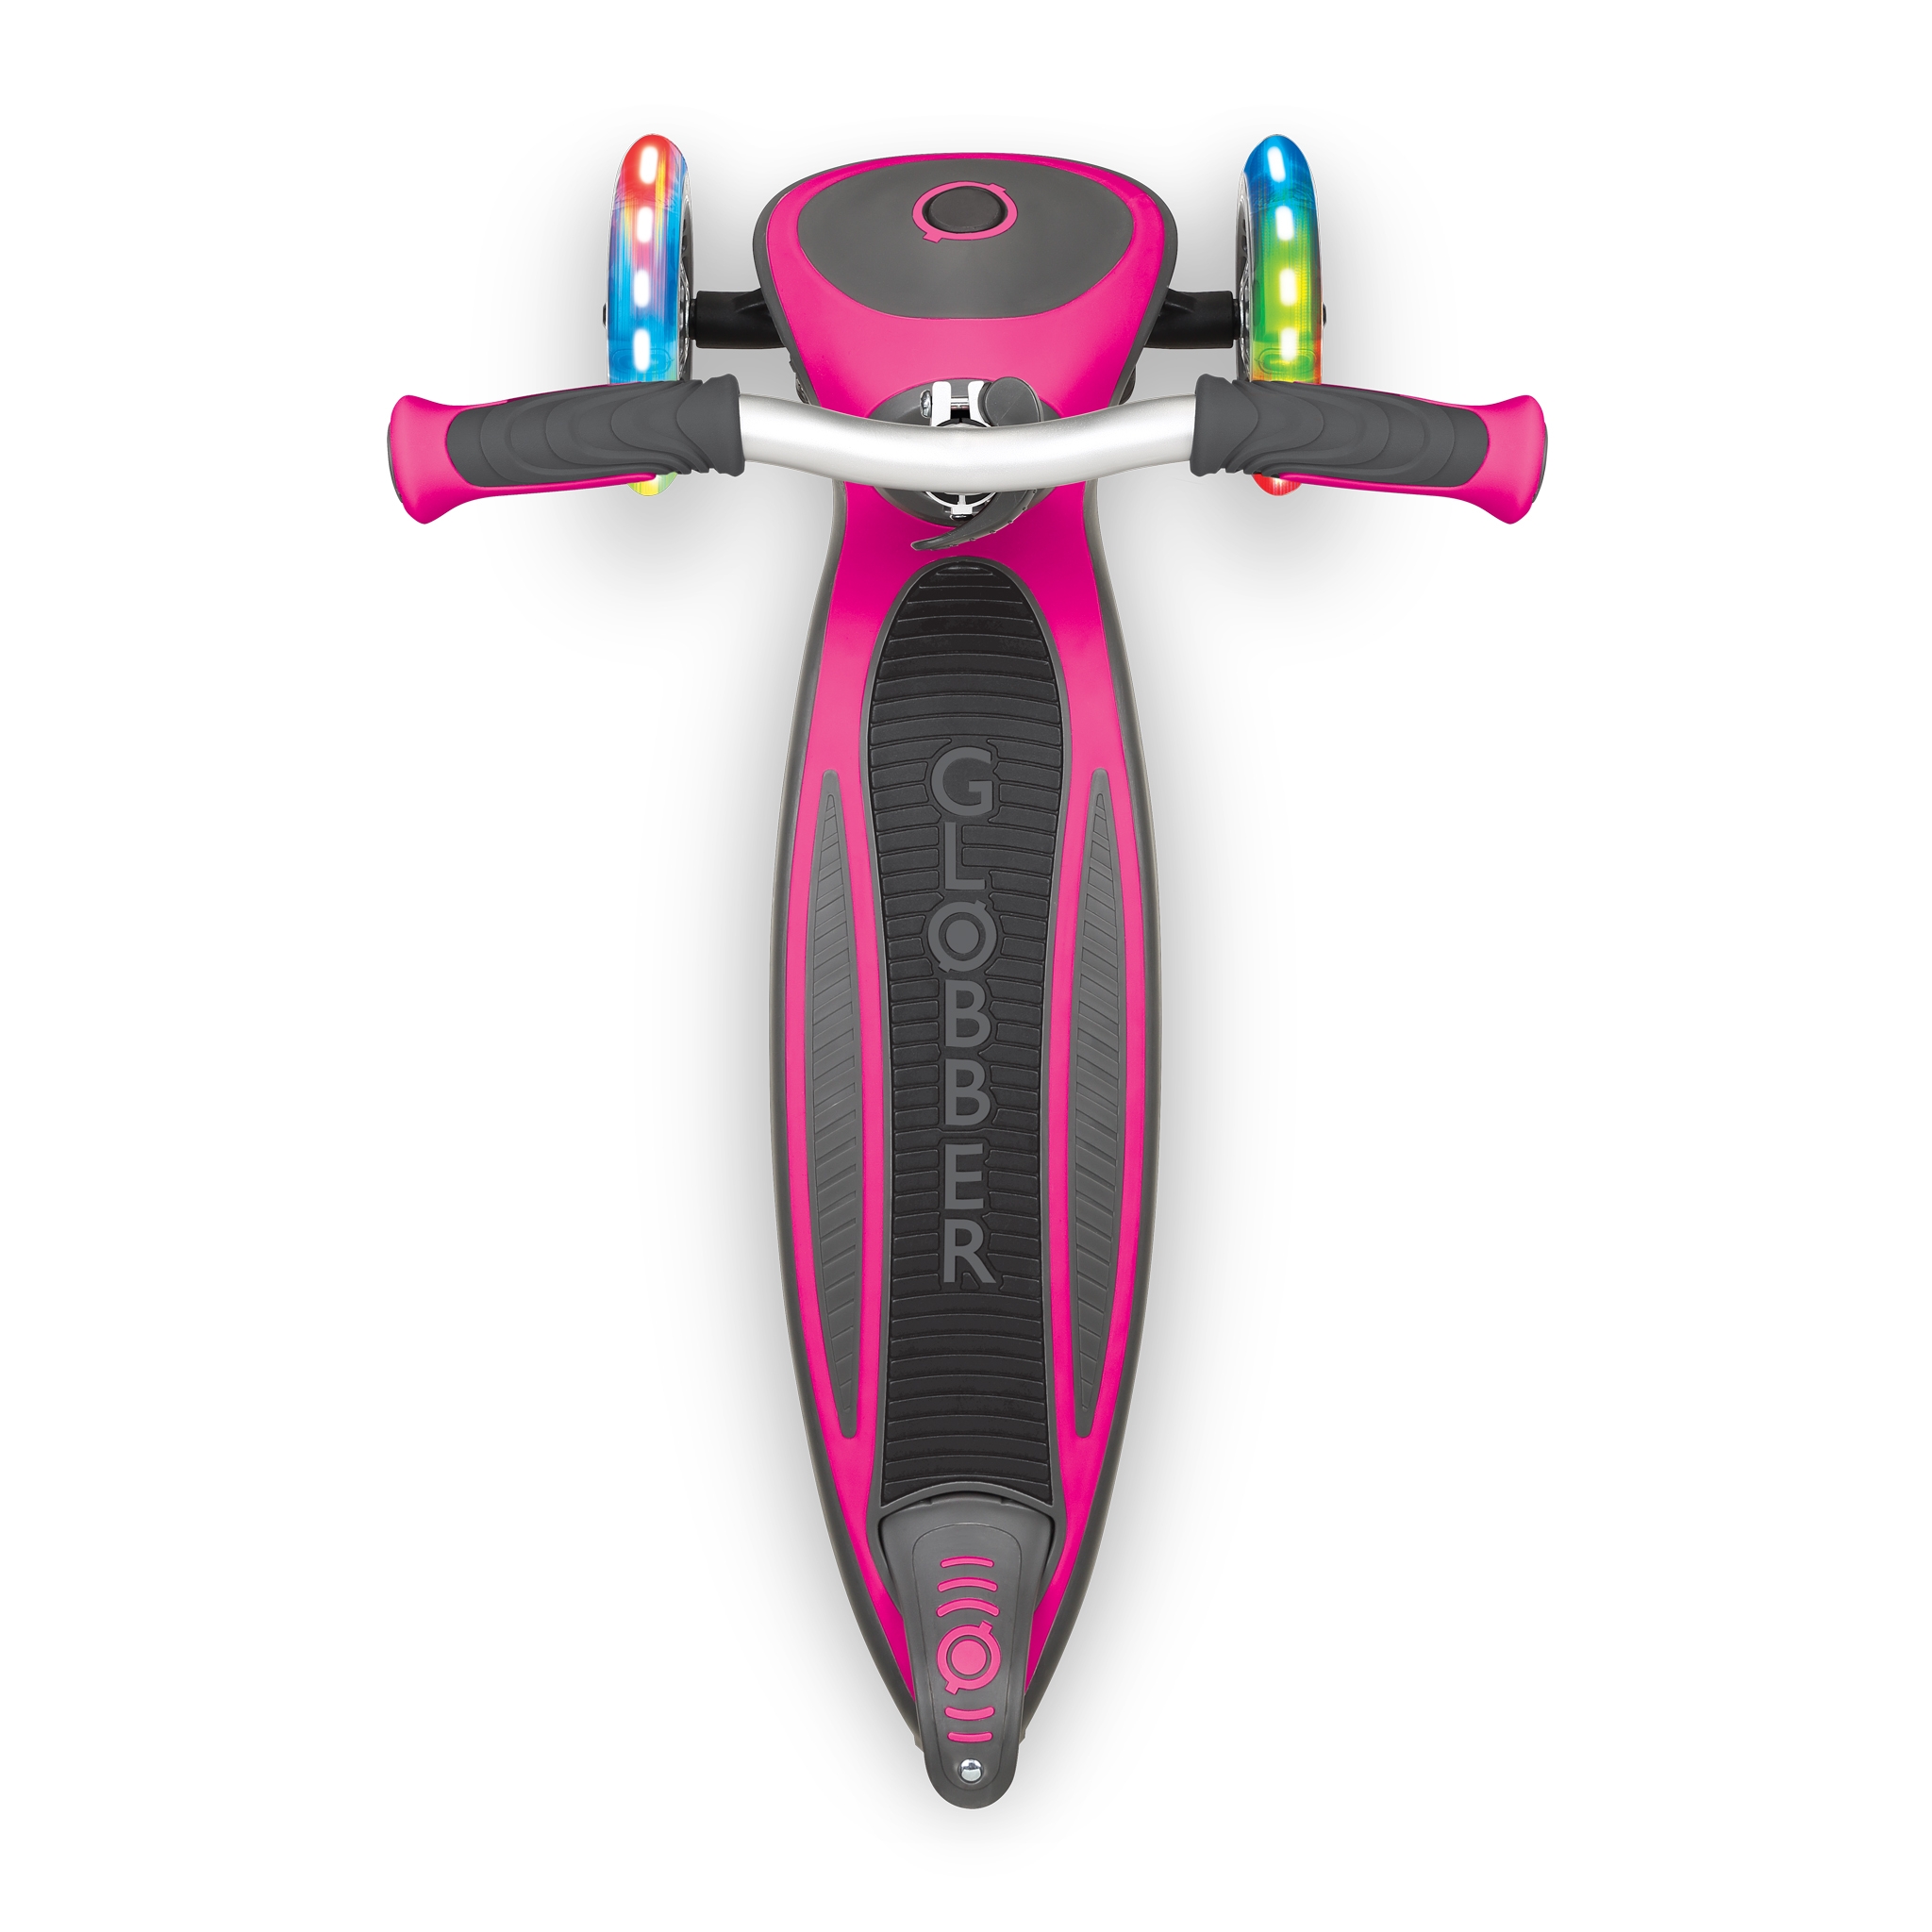 Globber-MASTER-LIGHTS-3-wheel-foldable-light-up-scooter-for-kids-with-extra-wide-anti-slip-deck-for-comfortable-rides_deep-pink 0